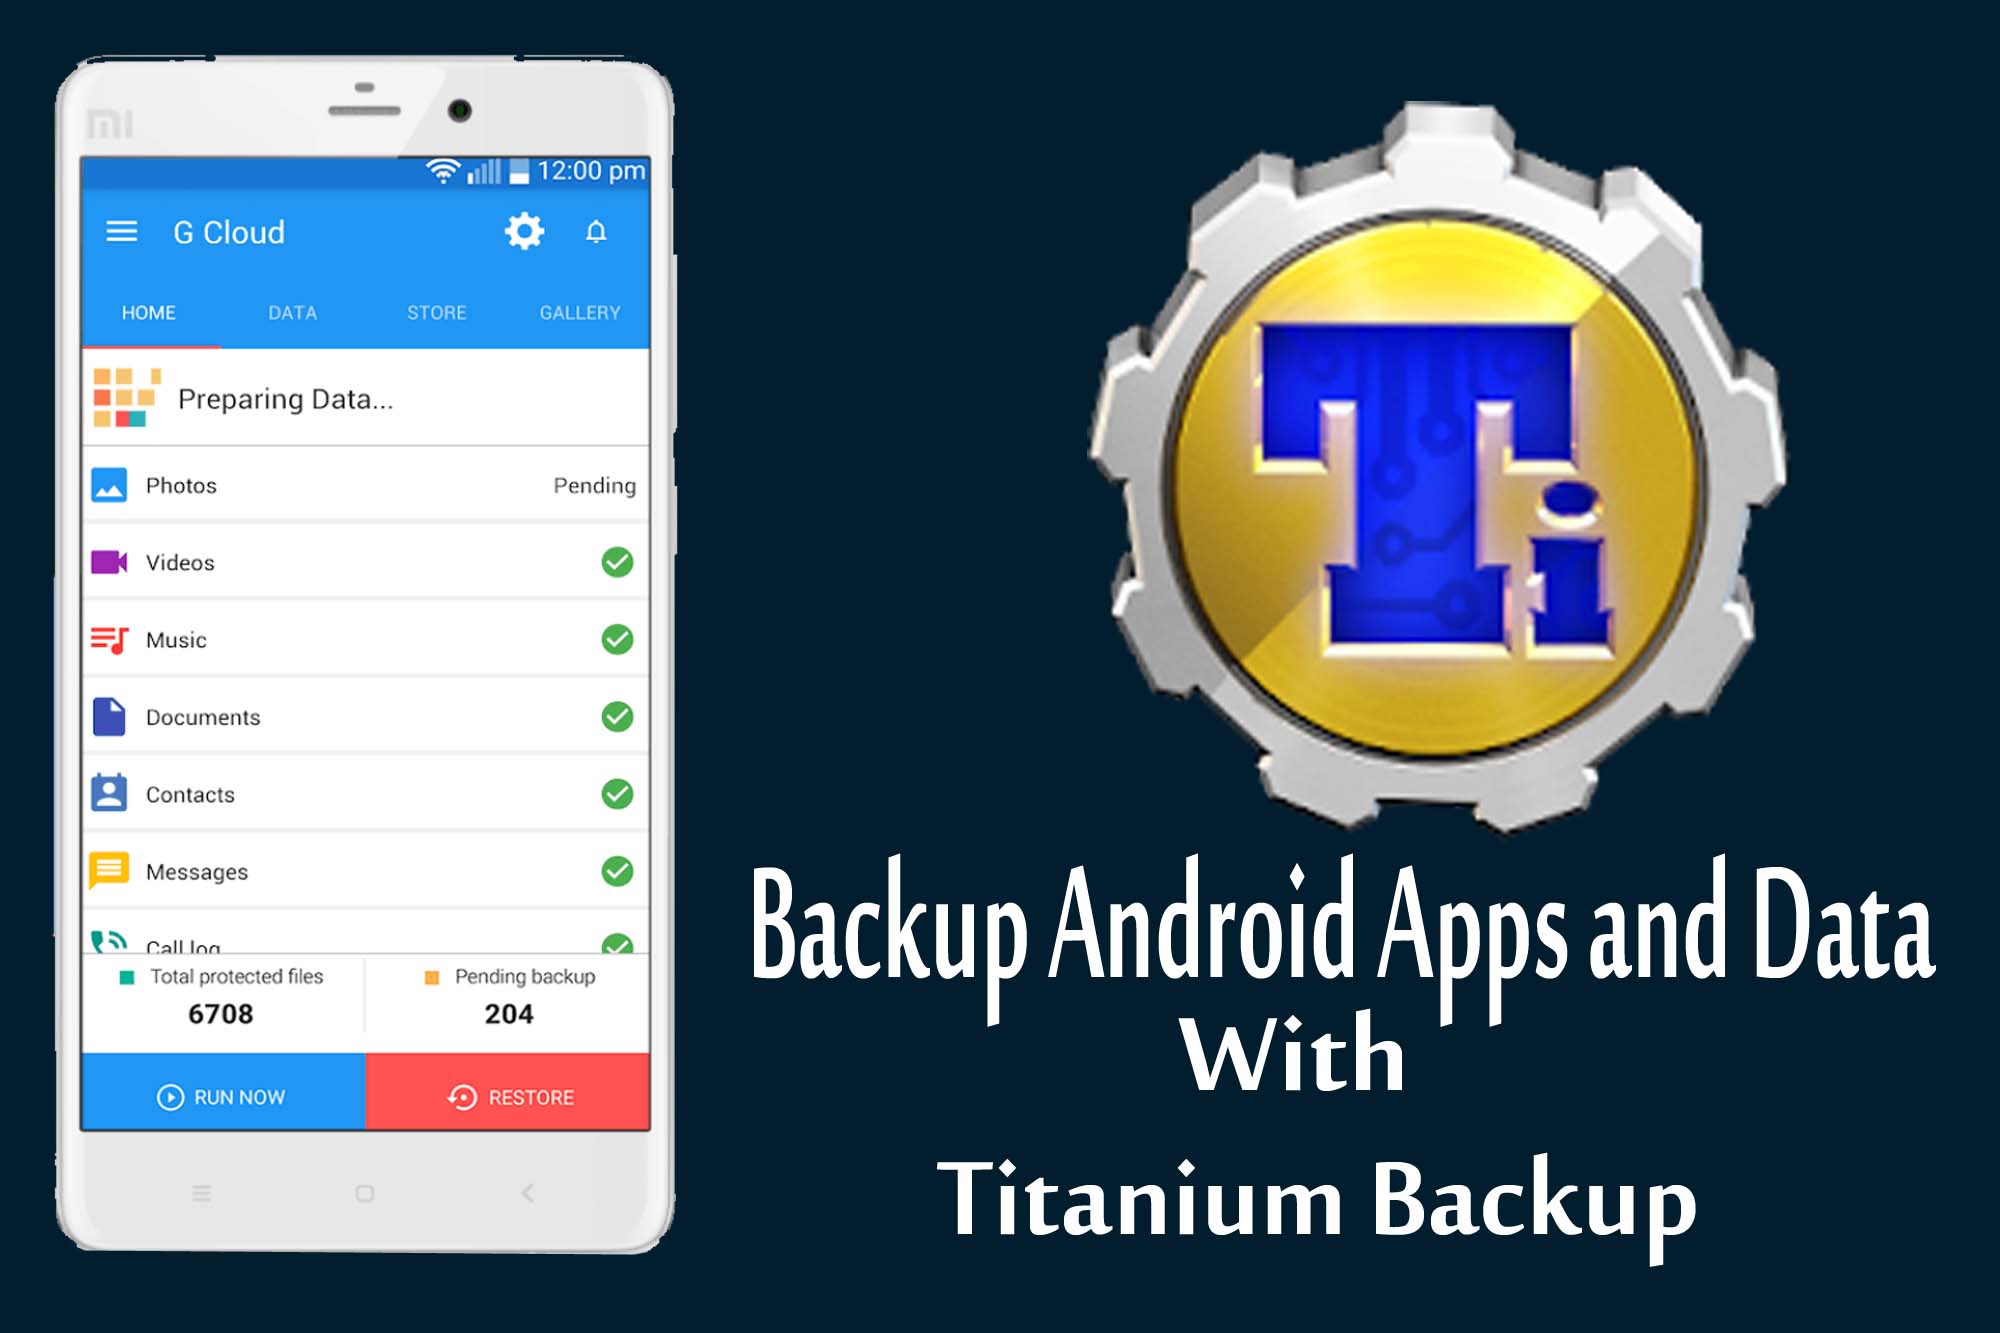 How to backup Android Apps and Data using Titanium